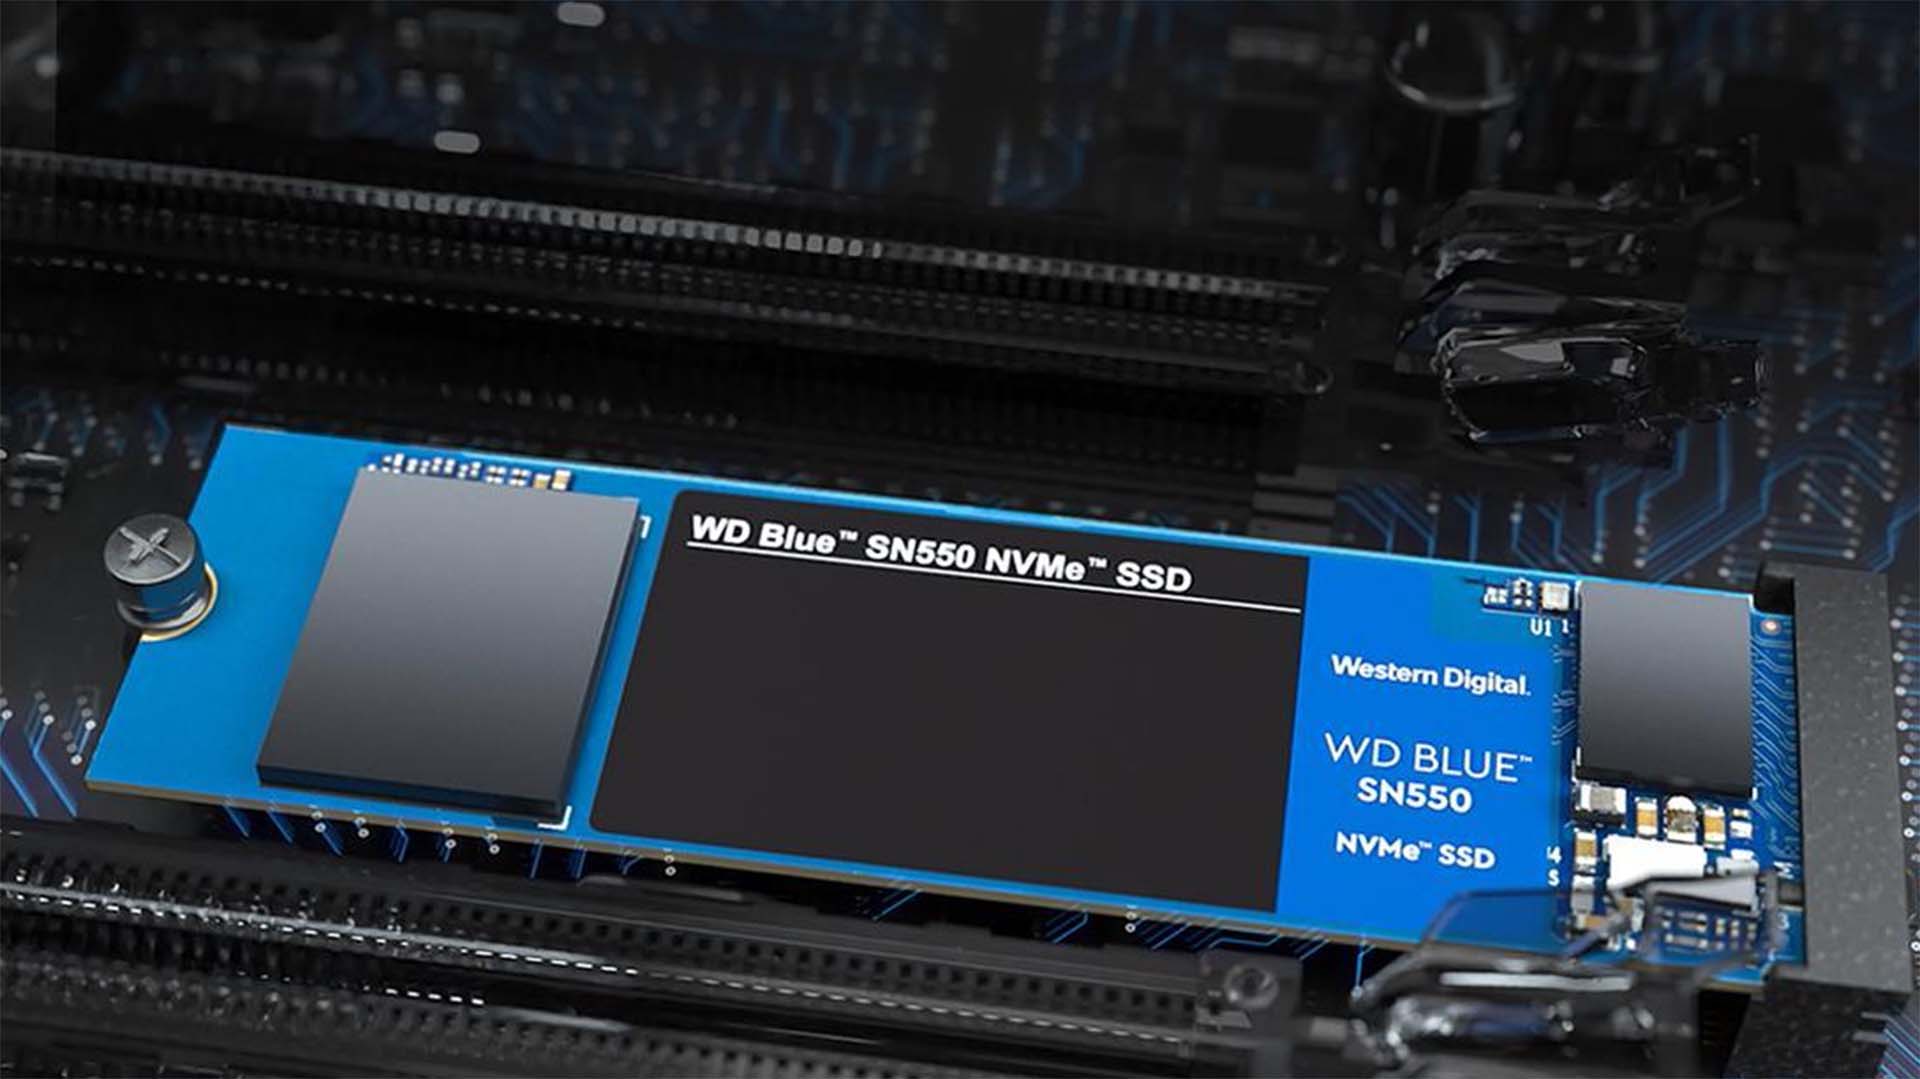  You can snag 1TB of NVMe SSD for just $90 right now 